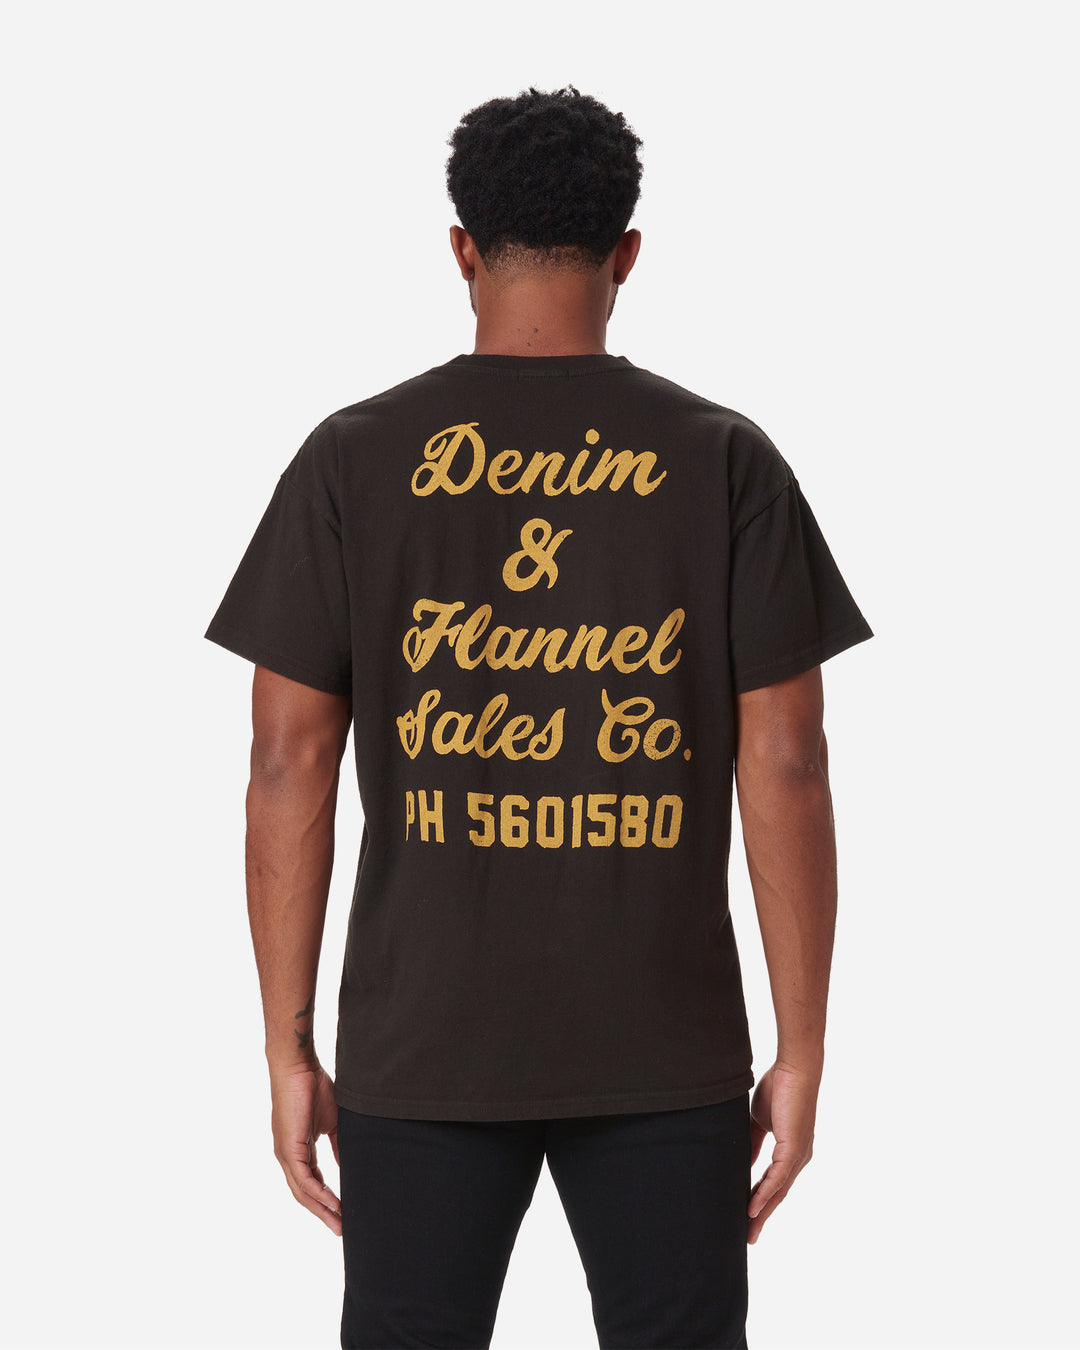 back of model wearing men's black graphic tee with gold lettering reading "denim & flannel sales co. ph 5601580"